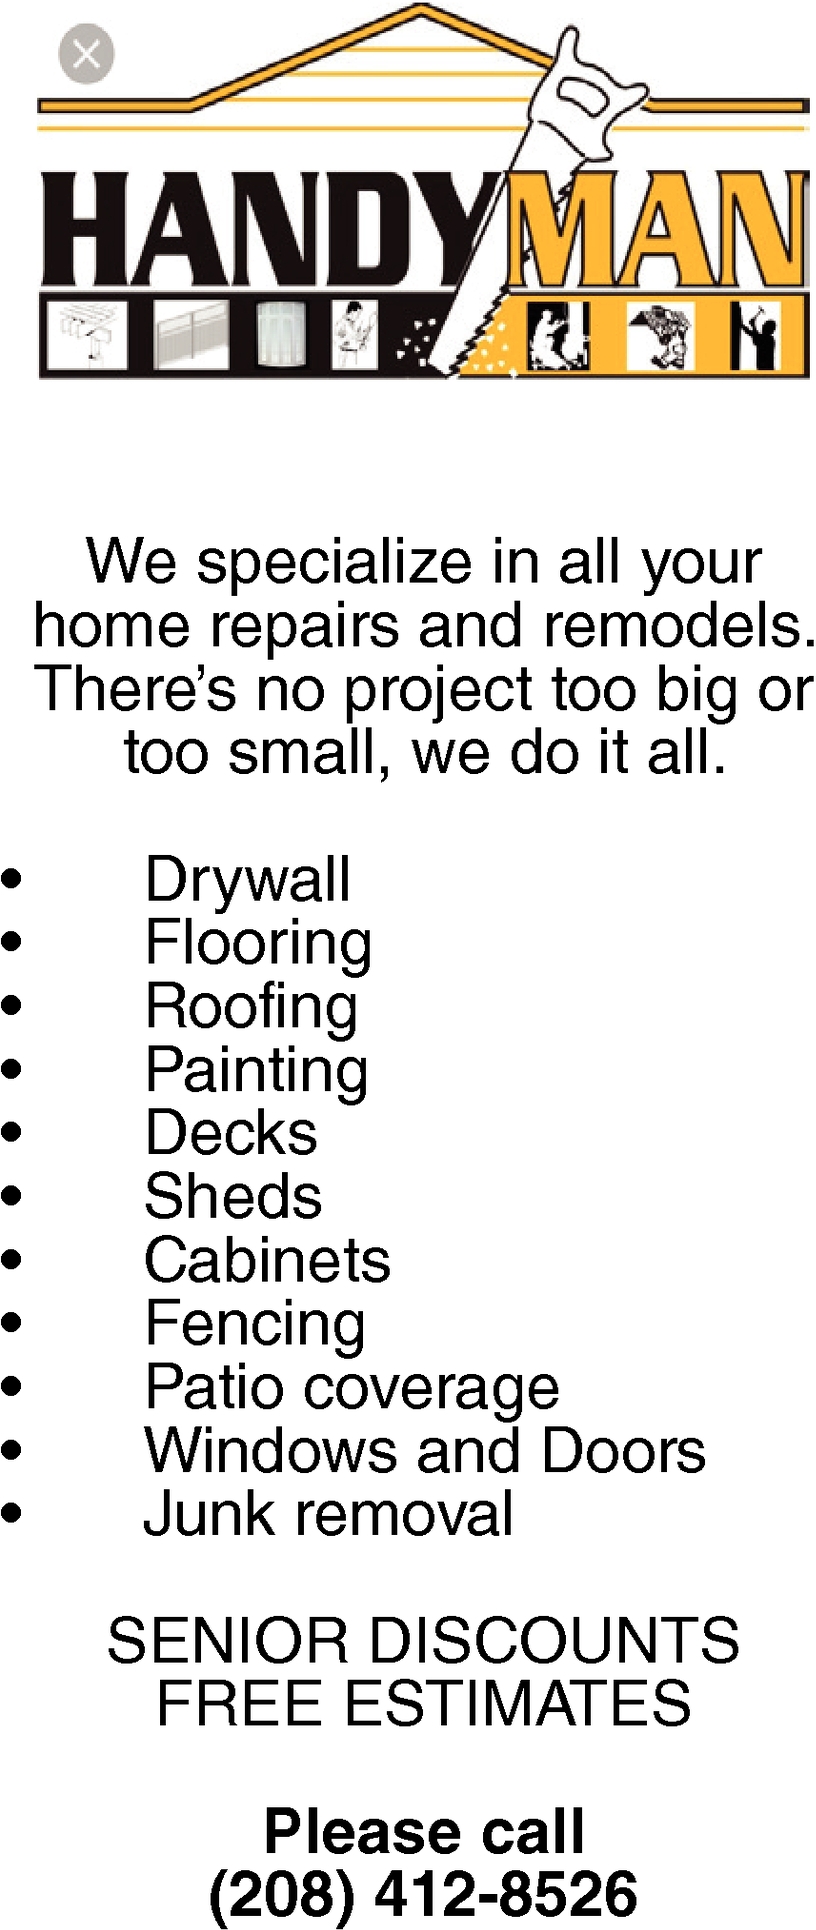 We specialize in all your home